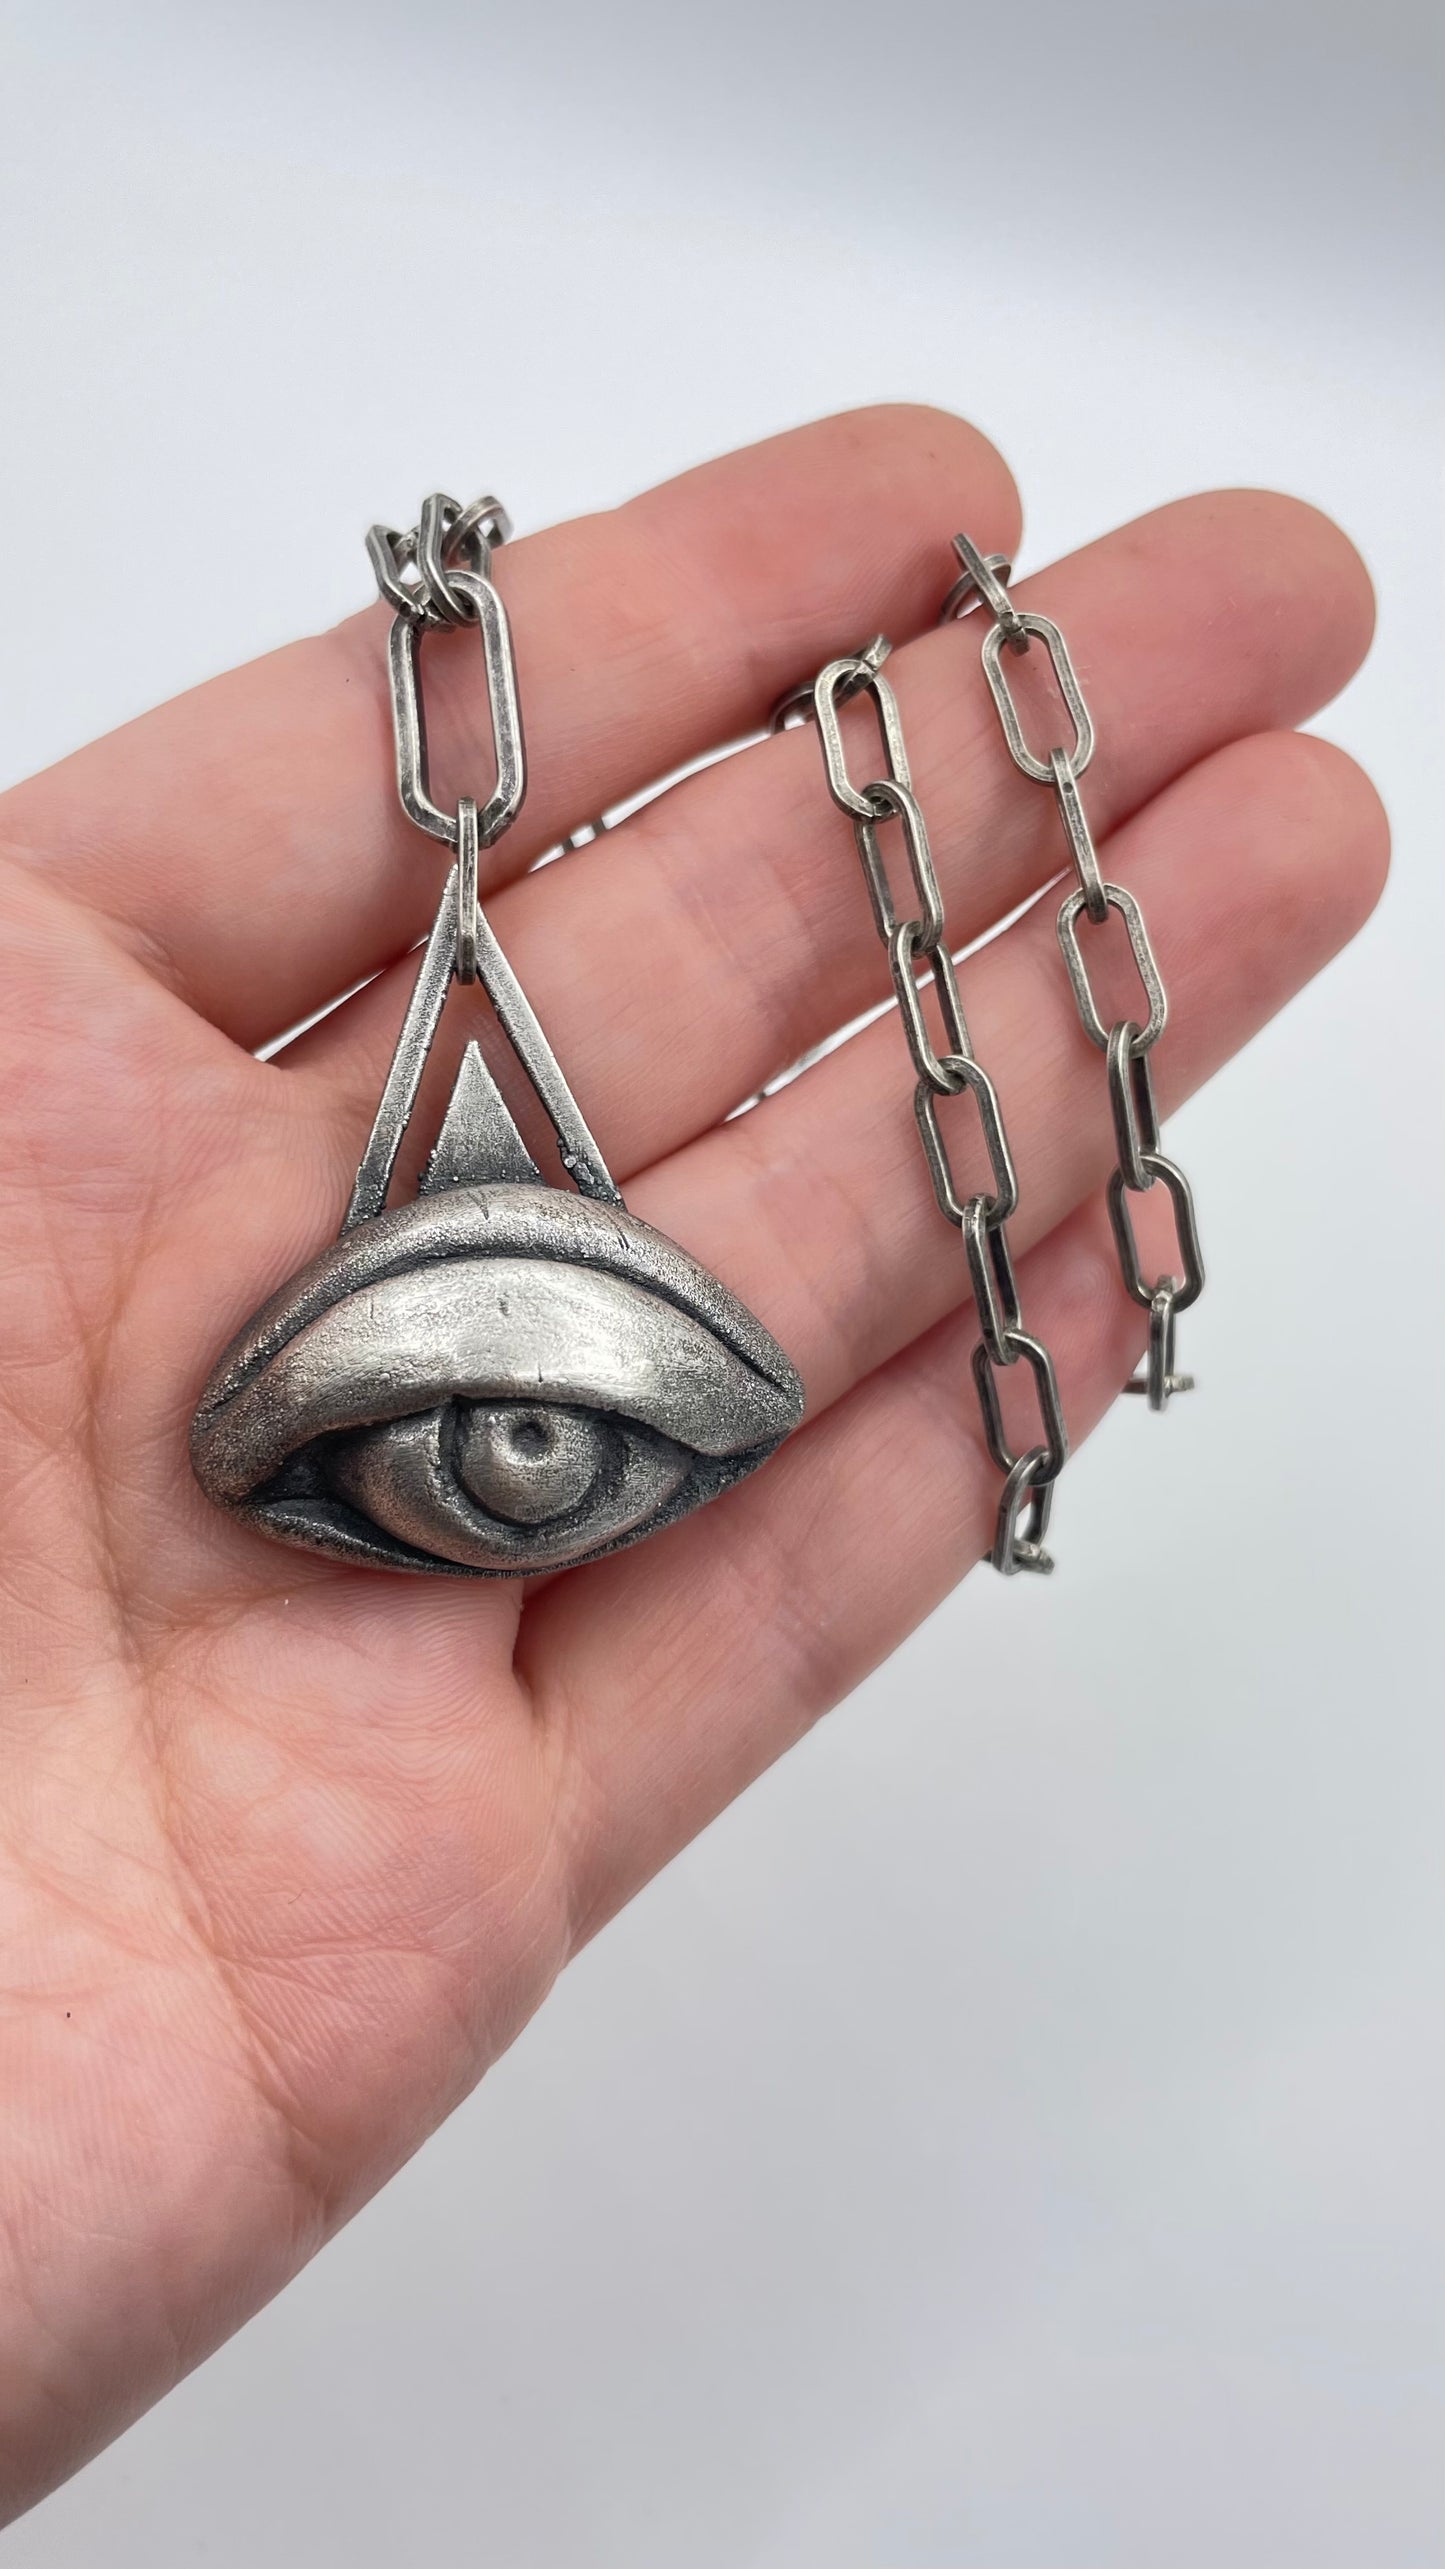 Evil Eye Necklace Collection in Silver or Copper by Inex Jewelry